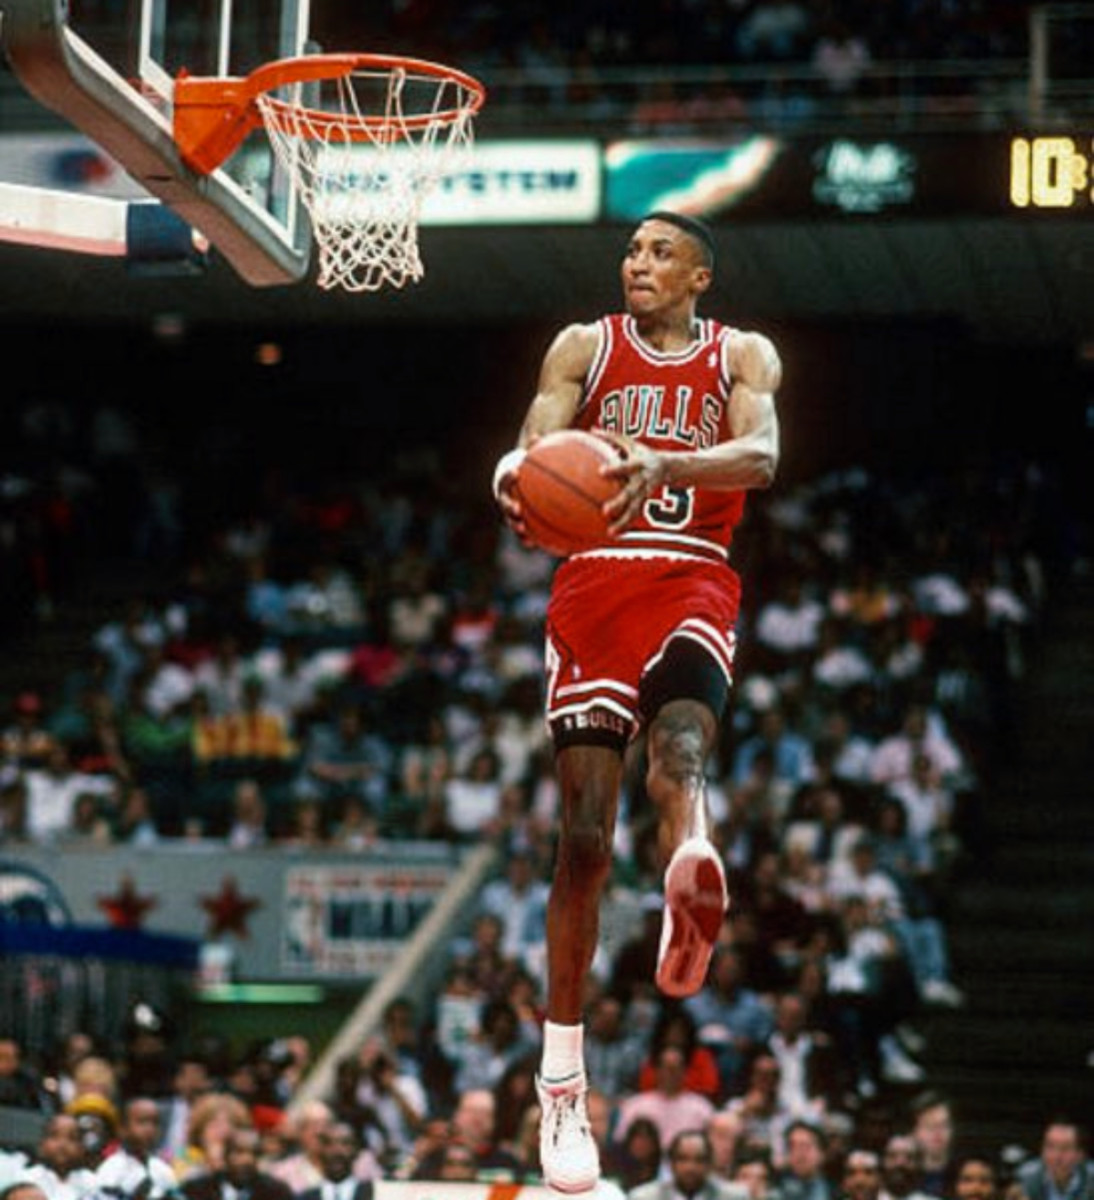 Scottie Pippen's Dunk From The Free Throw Line In The Dunk Contest Blew Everyone's Minds: "Wow, How Come This Is The First Time I've Seen This Footage?"